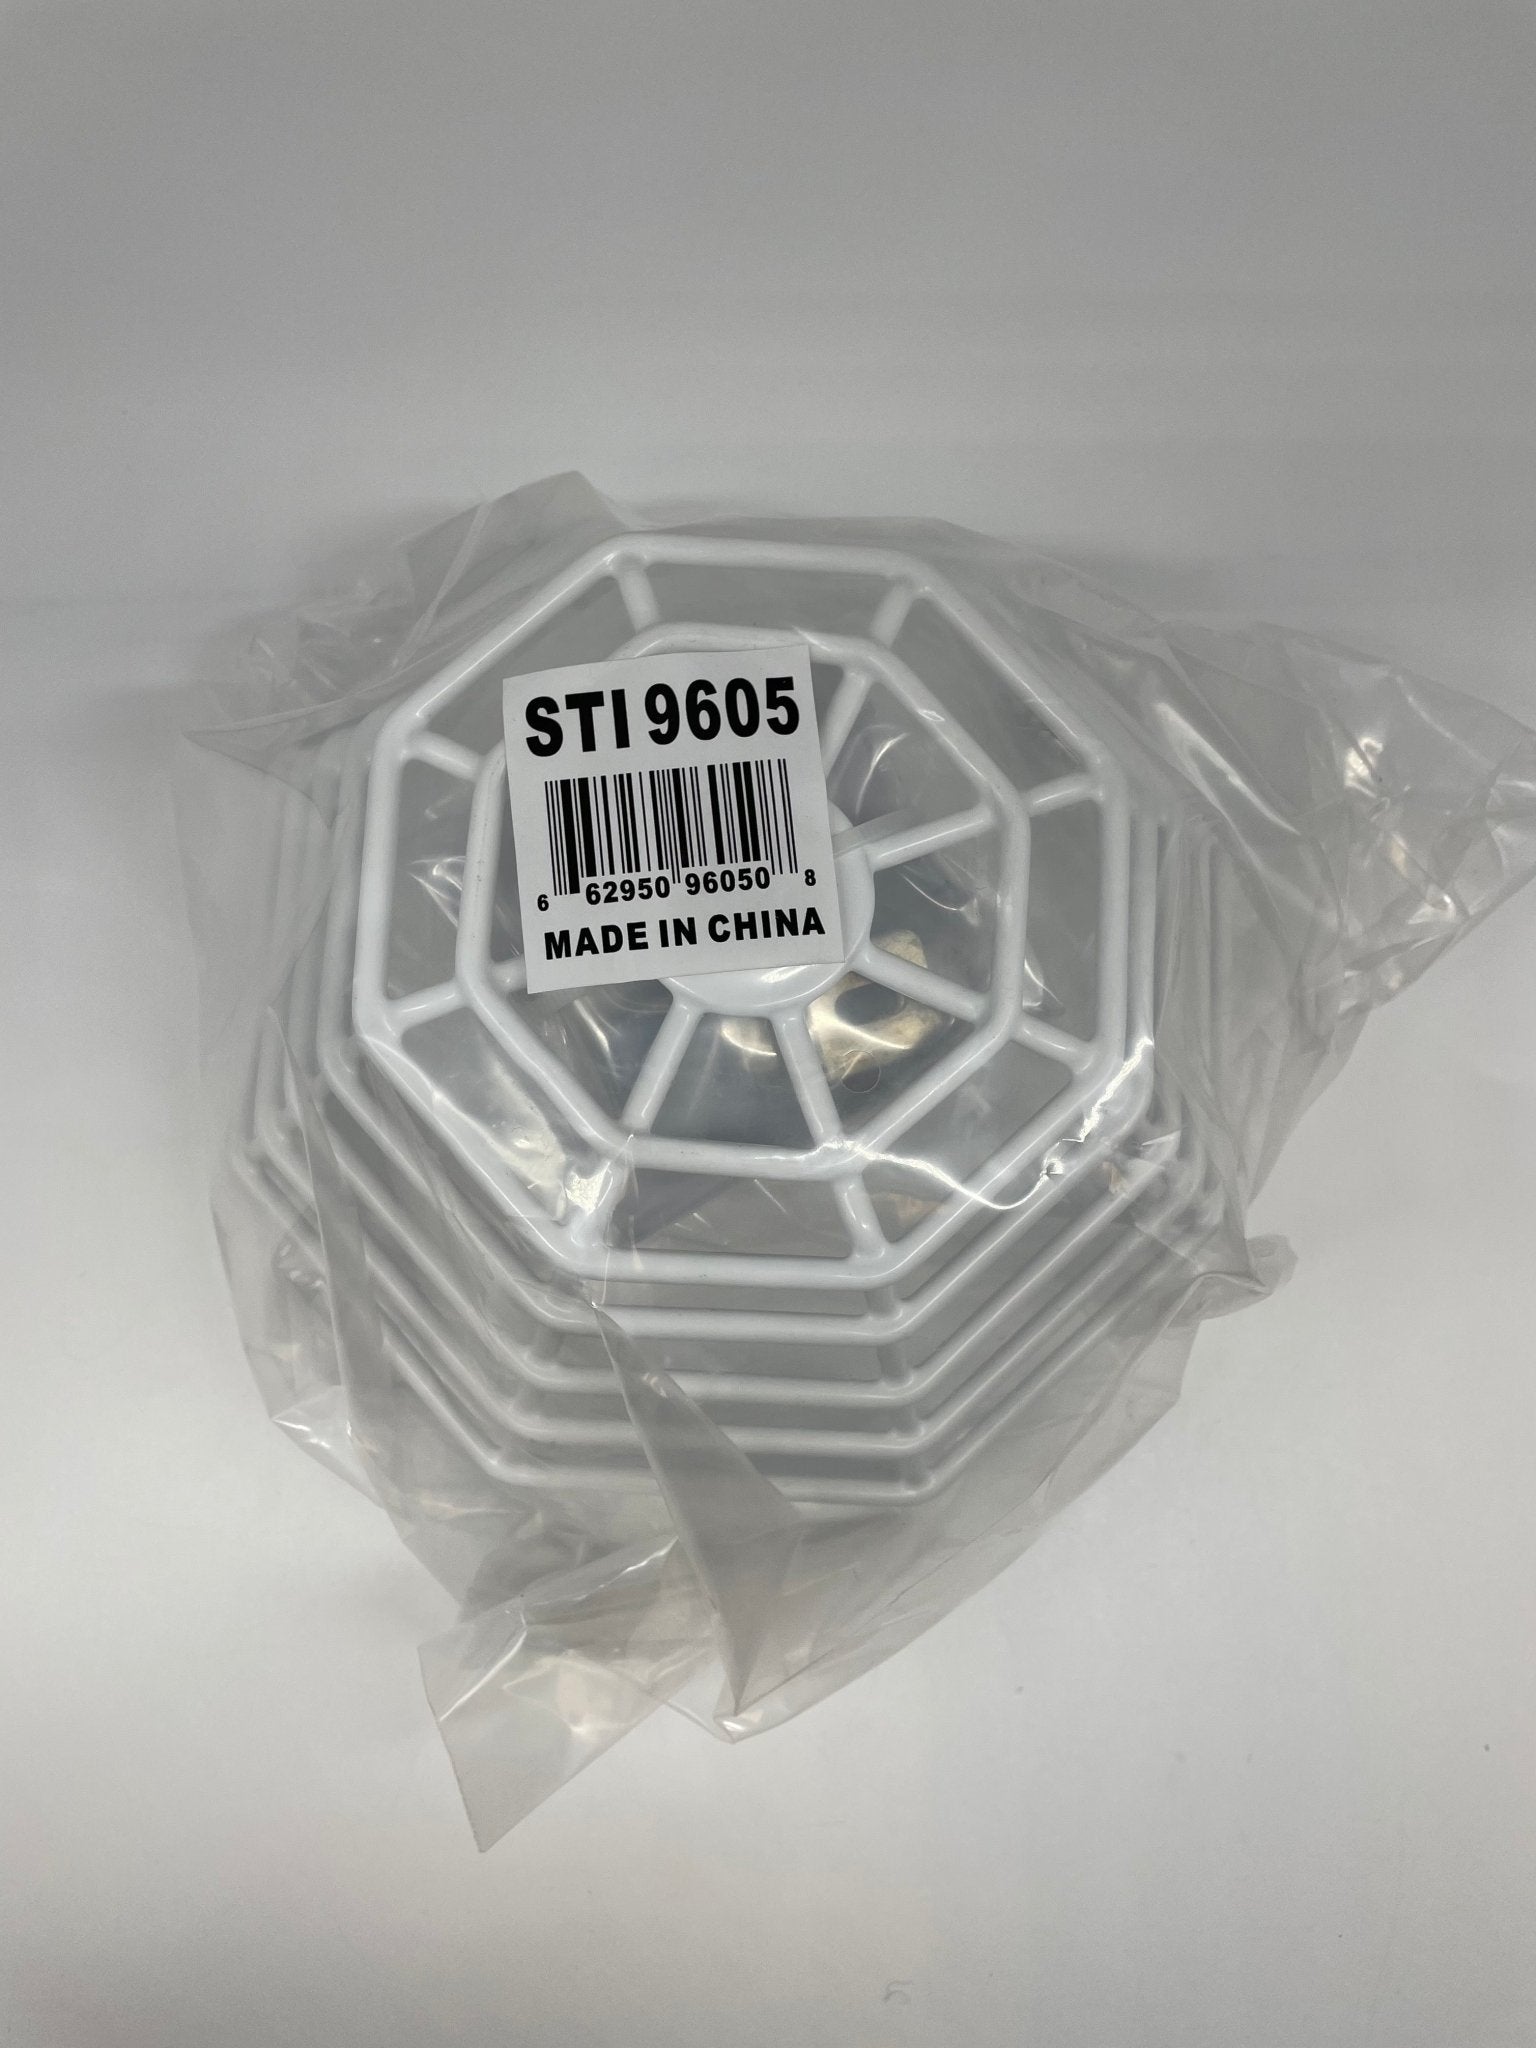 STI-9605 Safety Technology Steel Web Stopper, for Mini Smoke Detectors, Surface Mount - The Fire Alarm Supplier